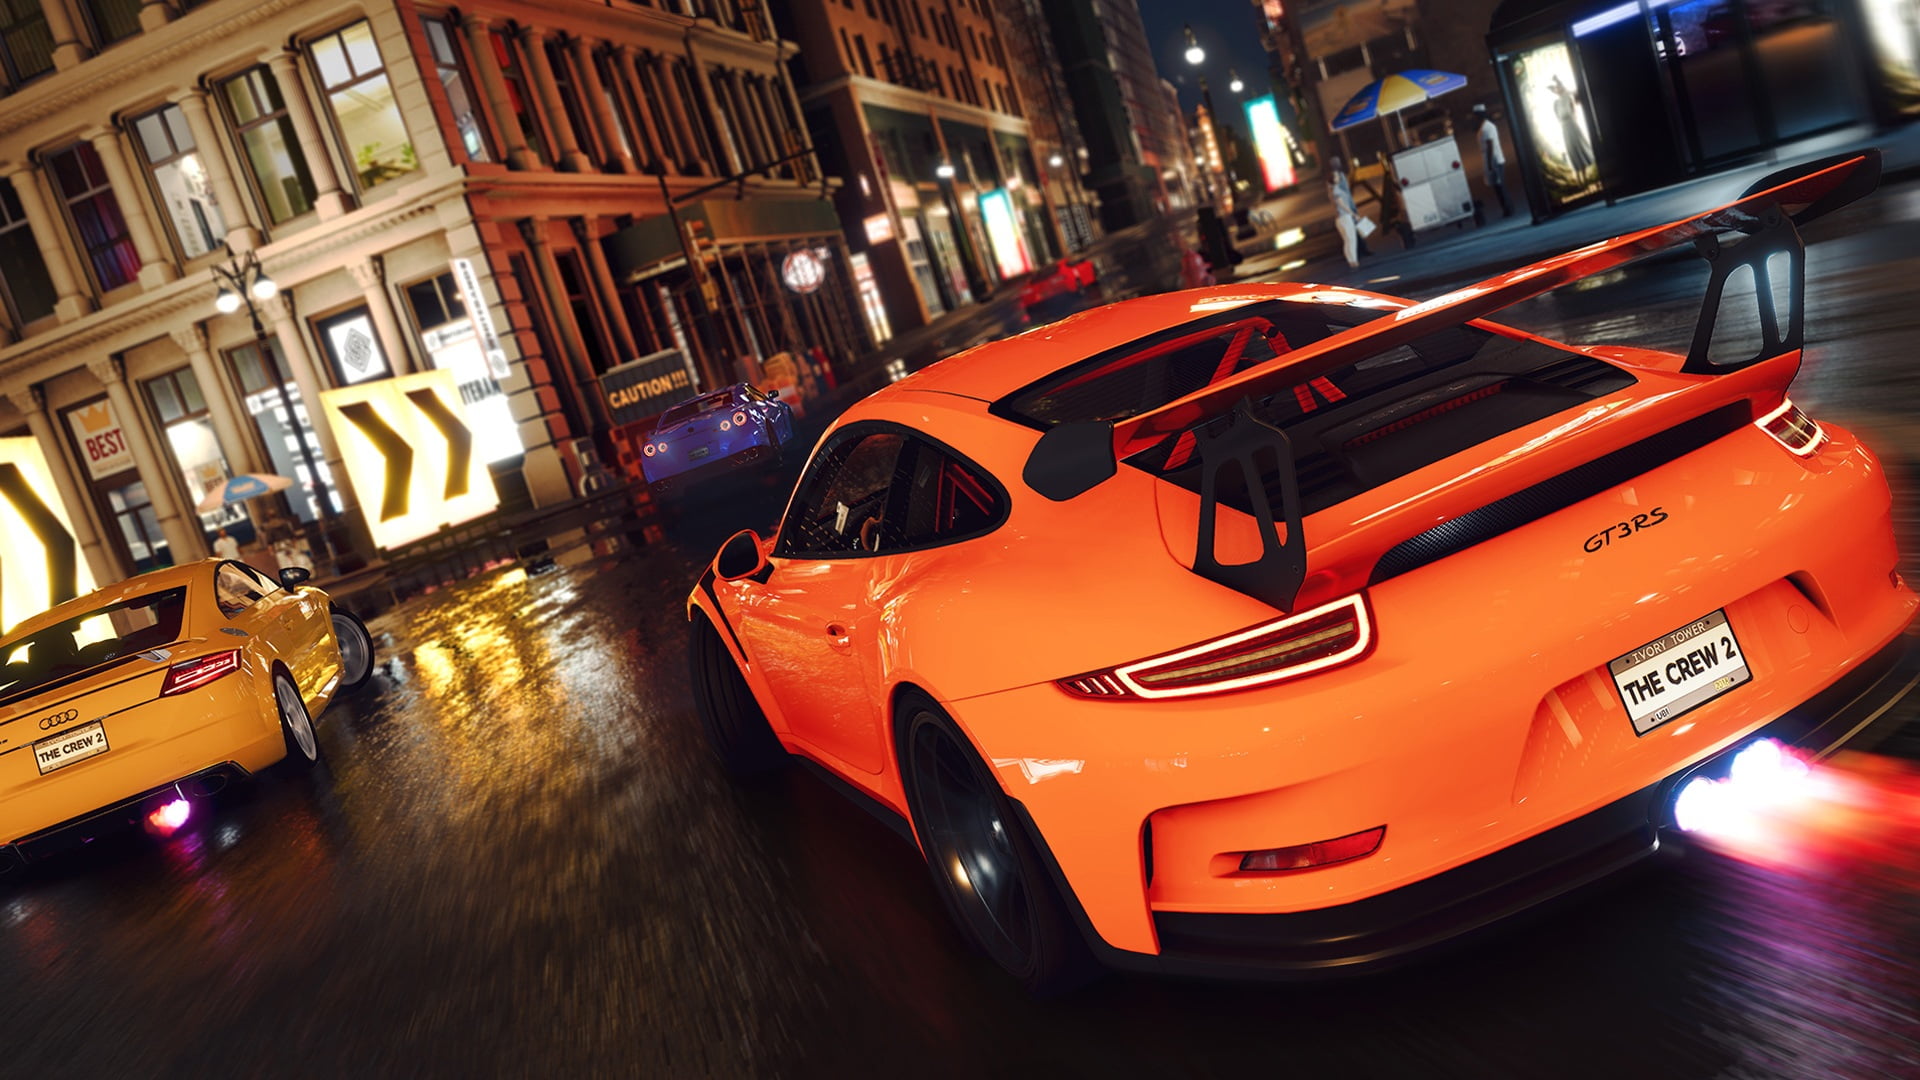 Need For Speed game application, The Crew 2, video games, The Crew